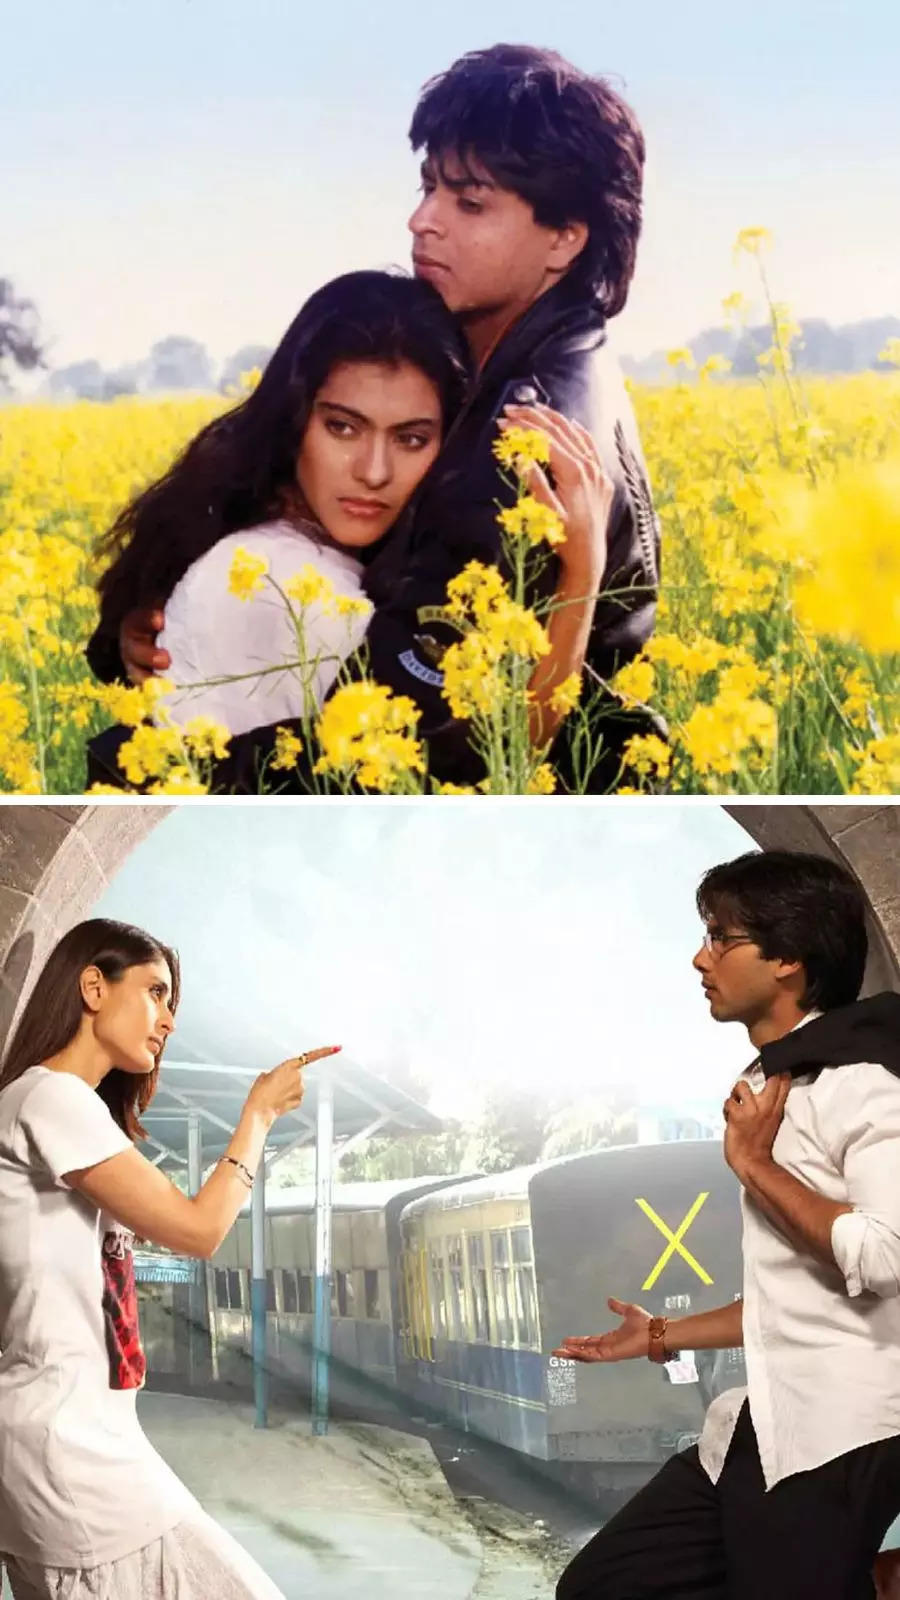 Dilwale Dulhania Le Jayenge - It's the 'Shah Rukh Khan Film Festival'!  Here's a chance to watch your favourite Shah Rukh Khan movie at the nearest  PVR CINEMAS *Check local listings for